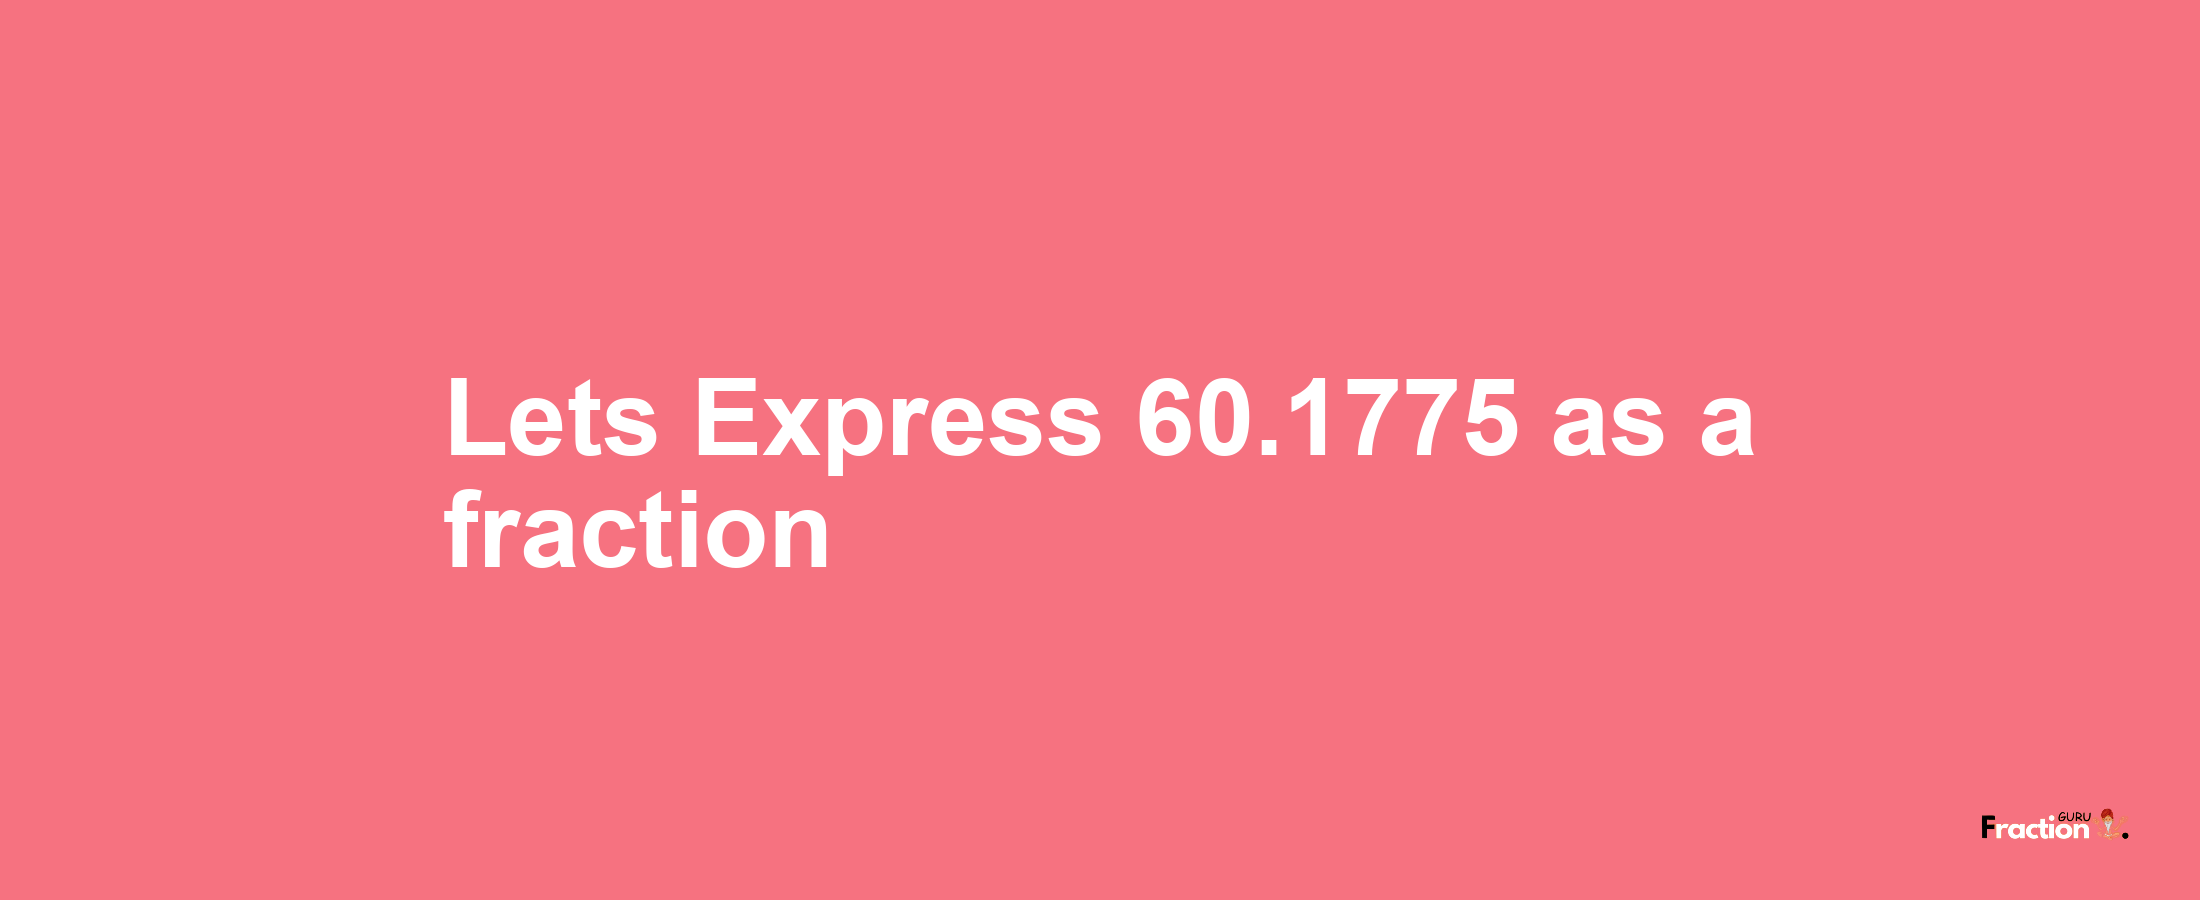 Lets Express 60.1775 as afraction